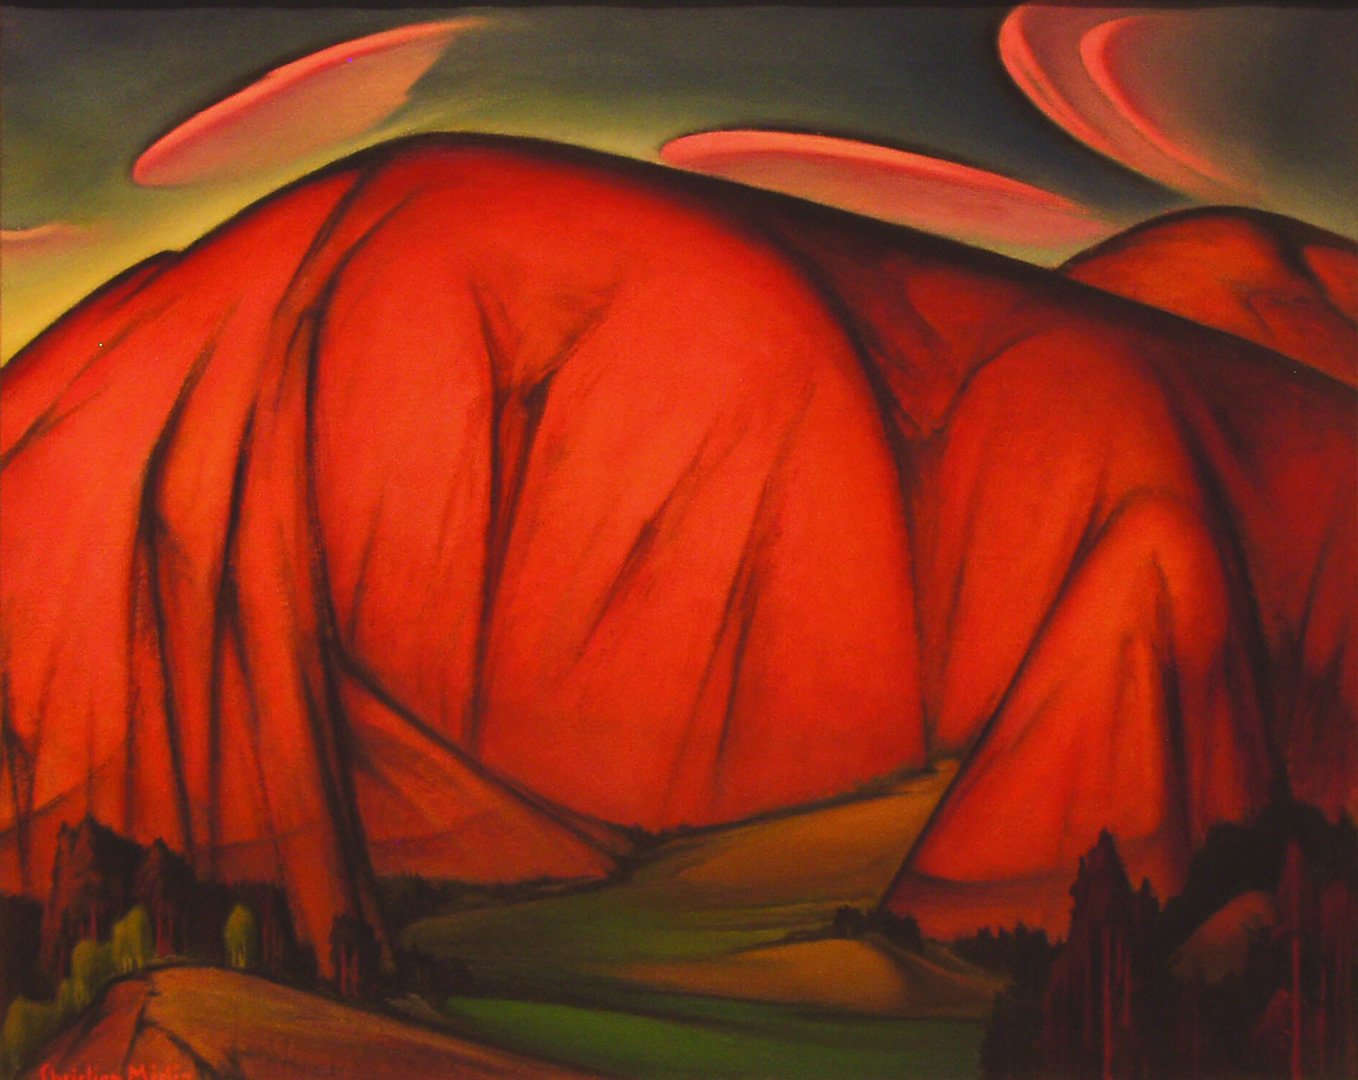 Giclée Print from Vesterheim's Collections - Red Mountain by Christian Midjo 20" x 25"